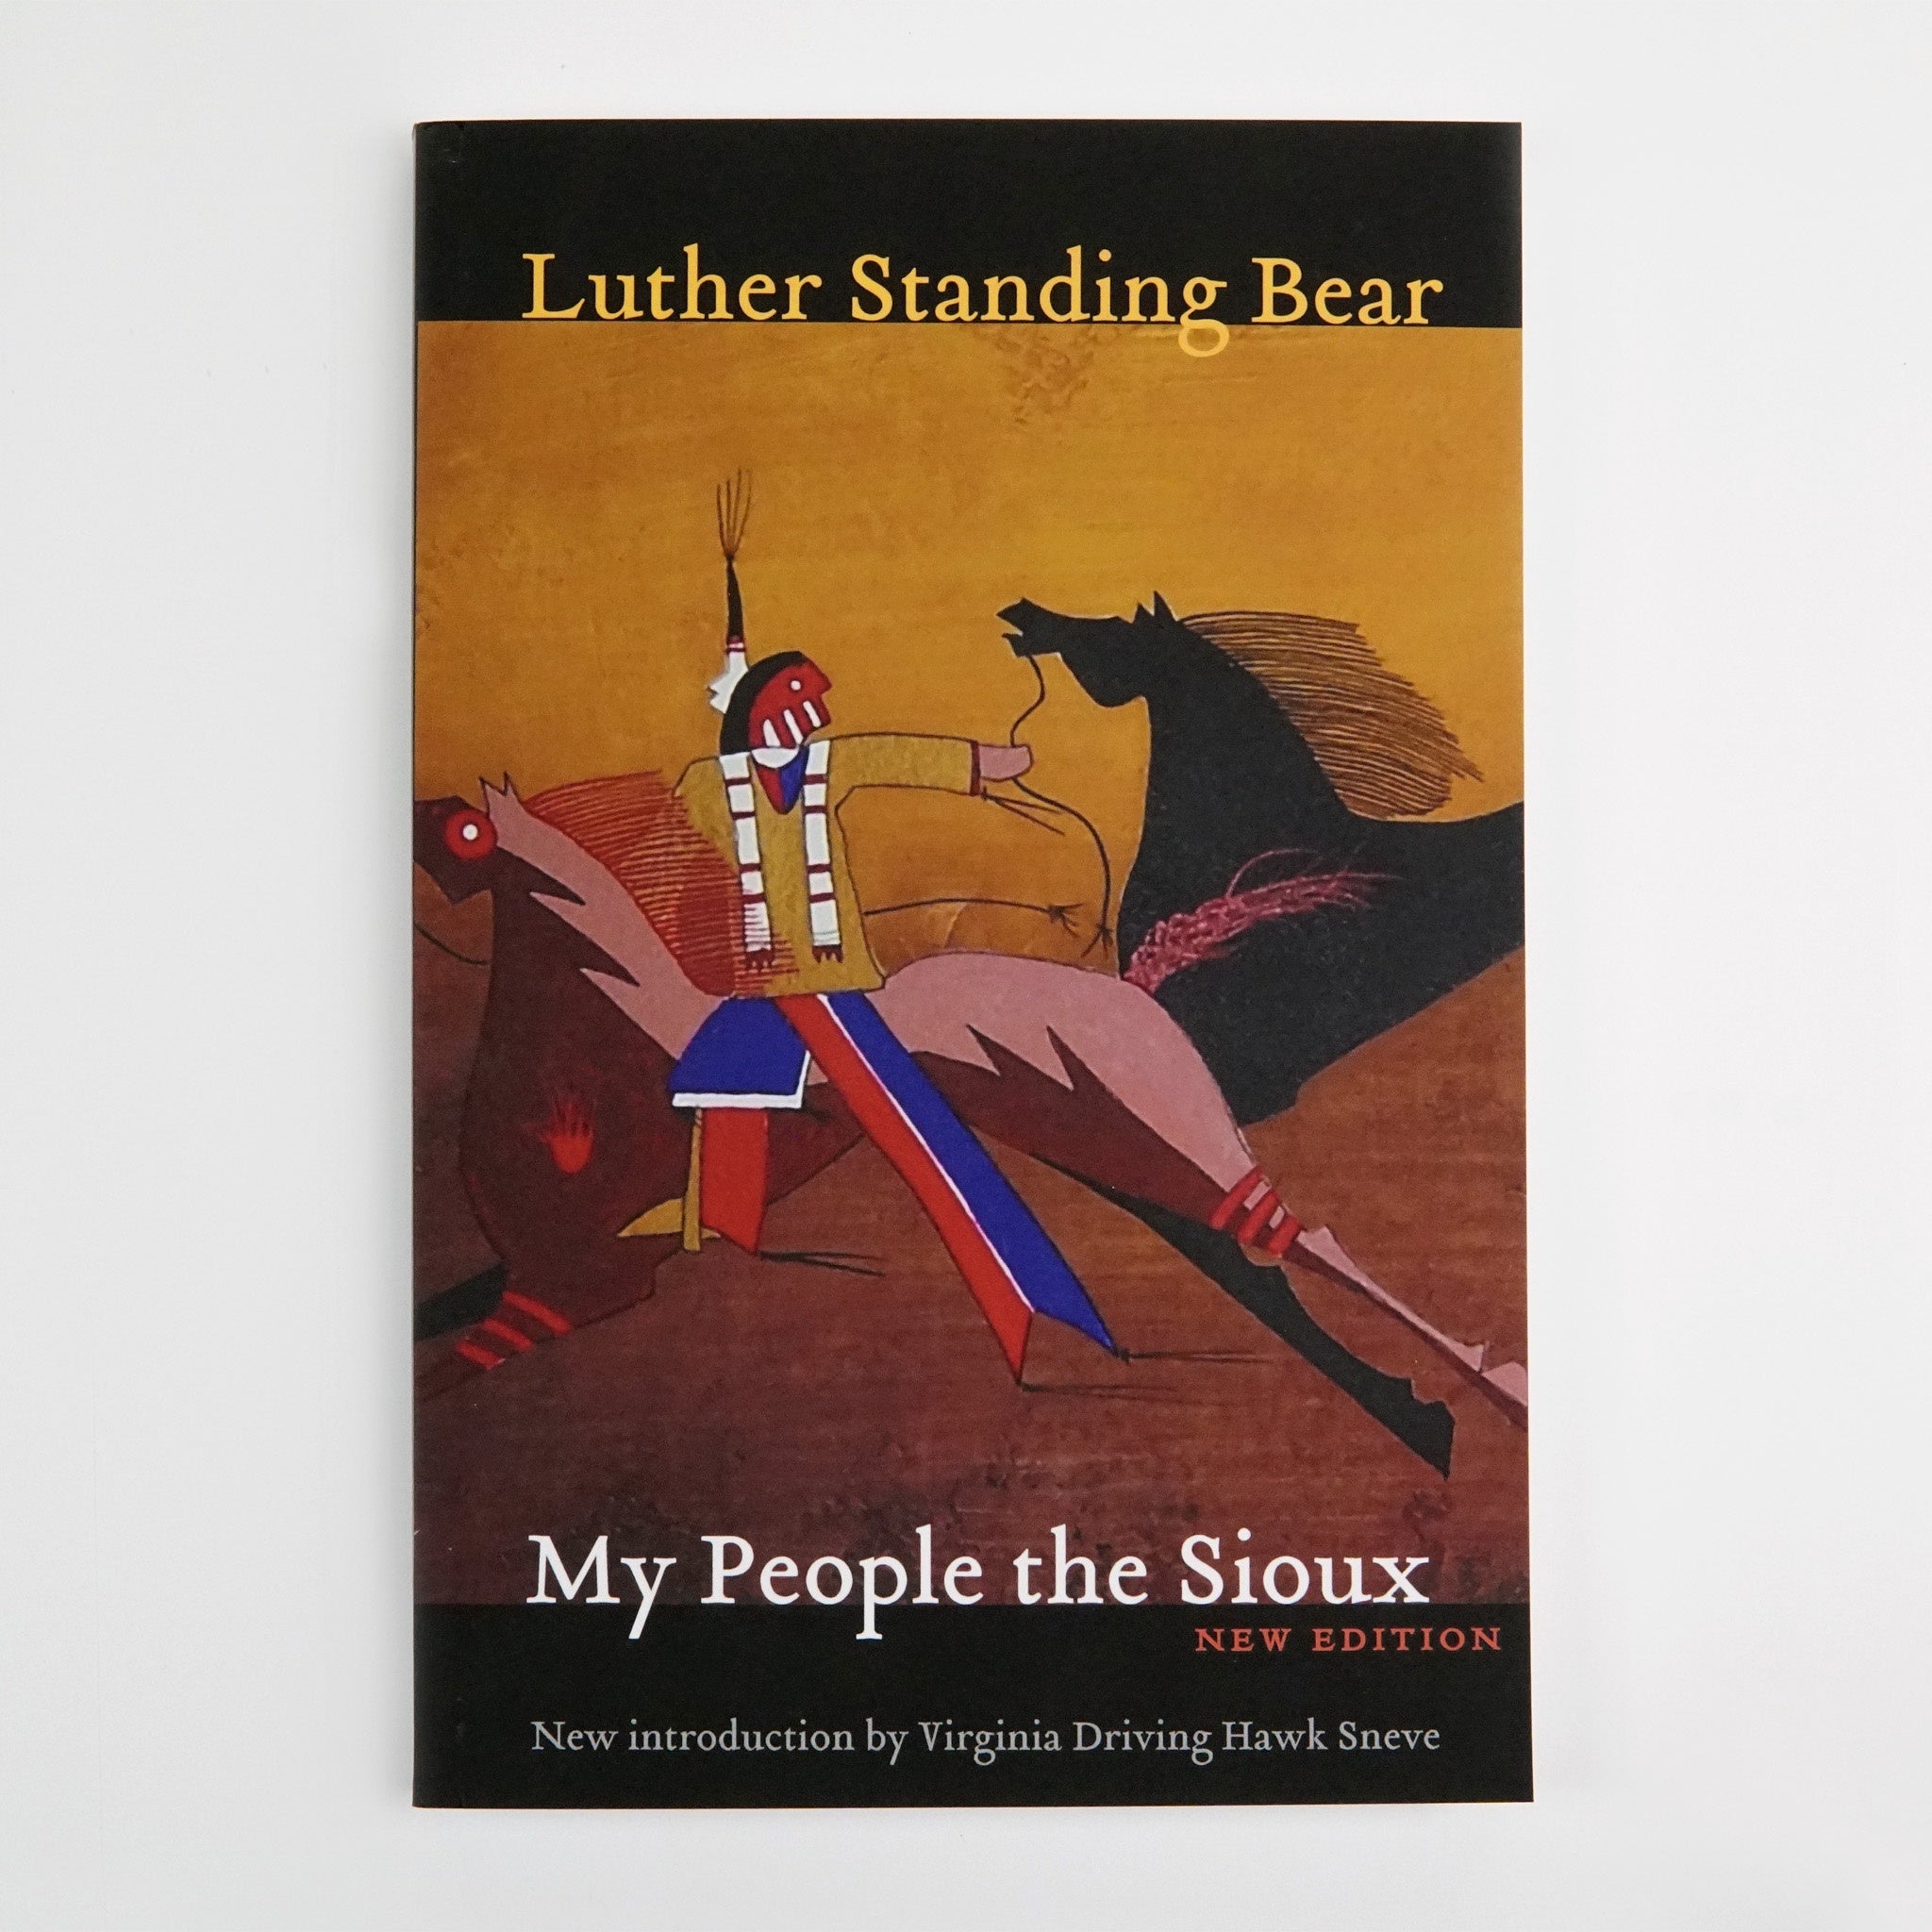 BK 12 MY PEOPLE THE SIOUX BY LUTHER STANDING BEAR #21044802 D2 APR24